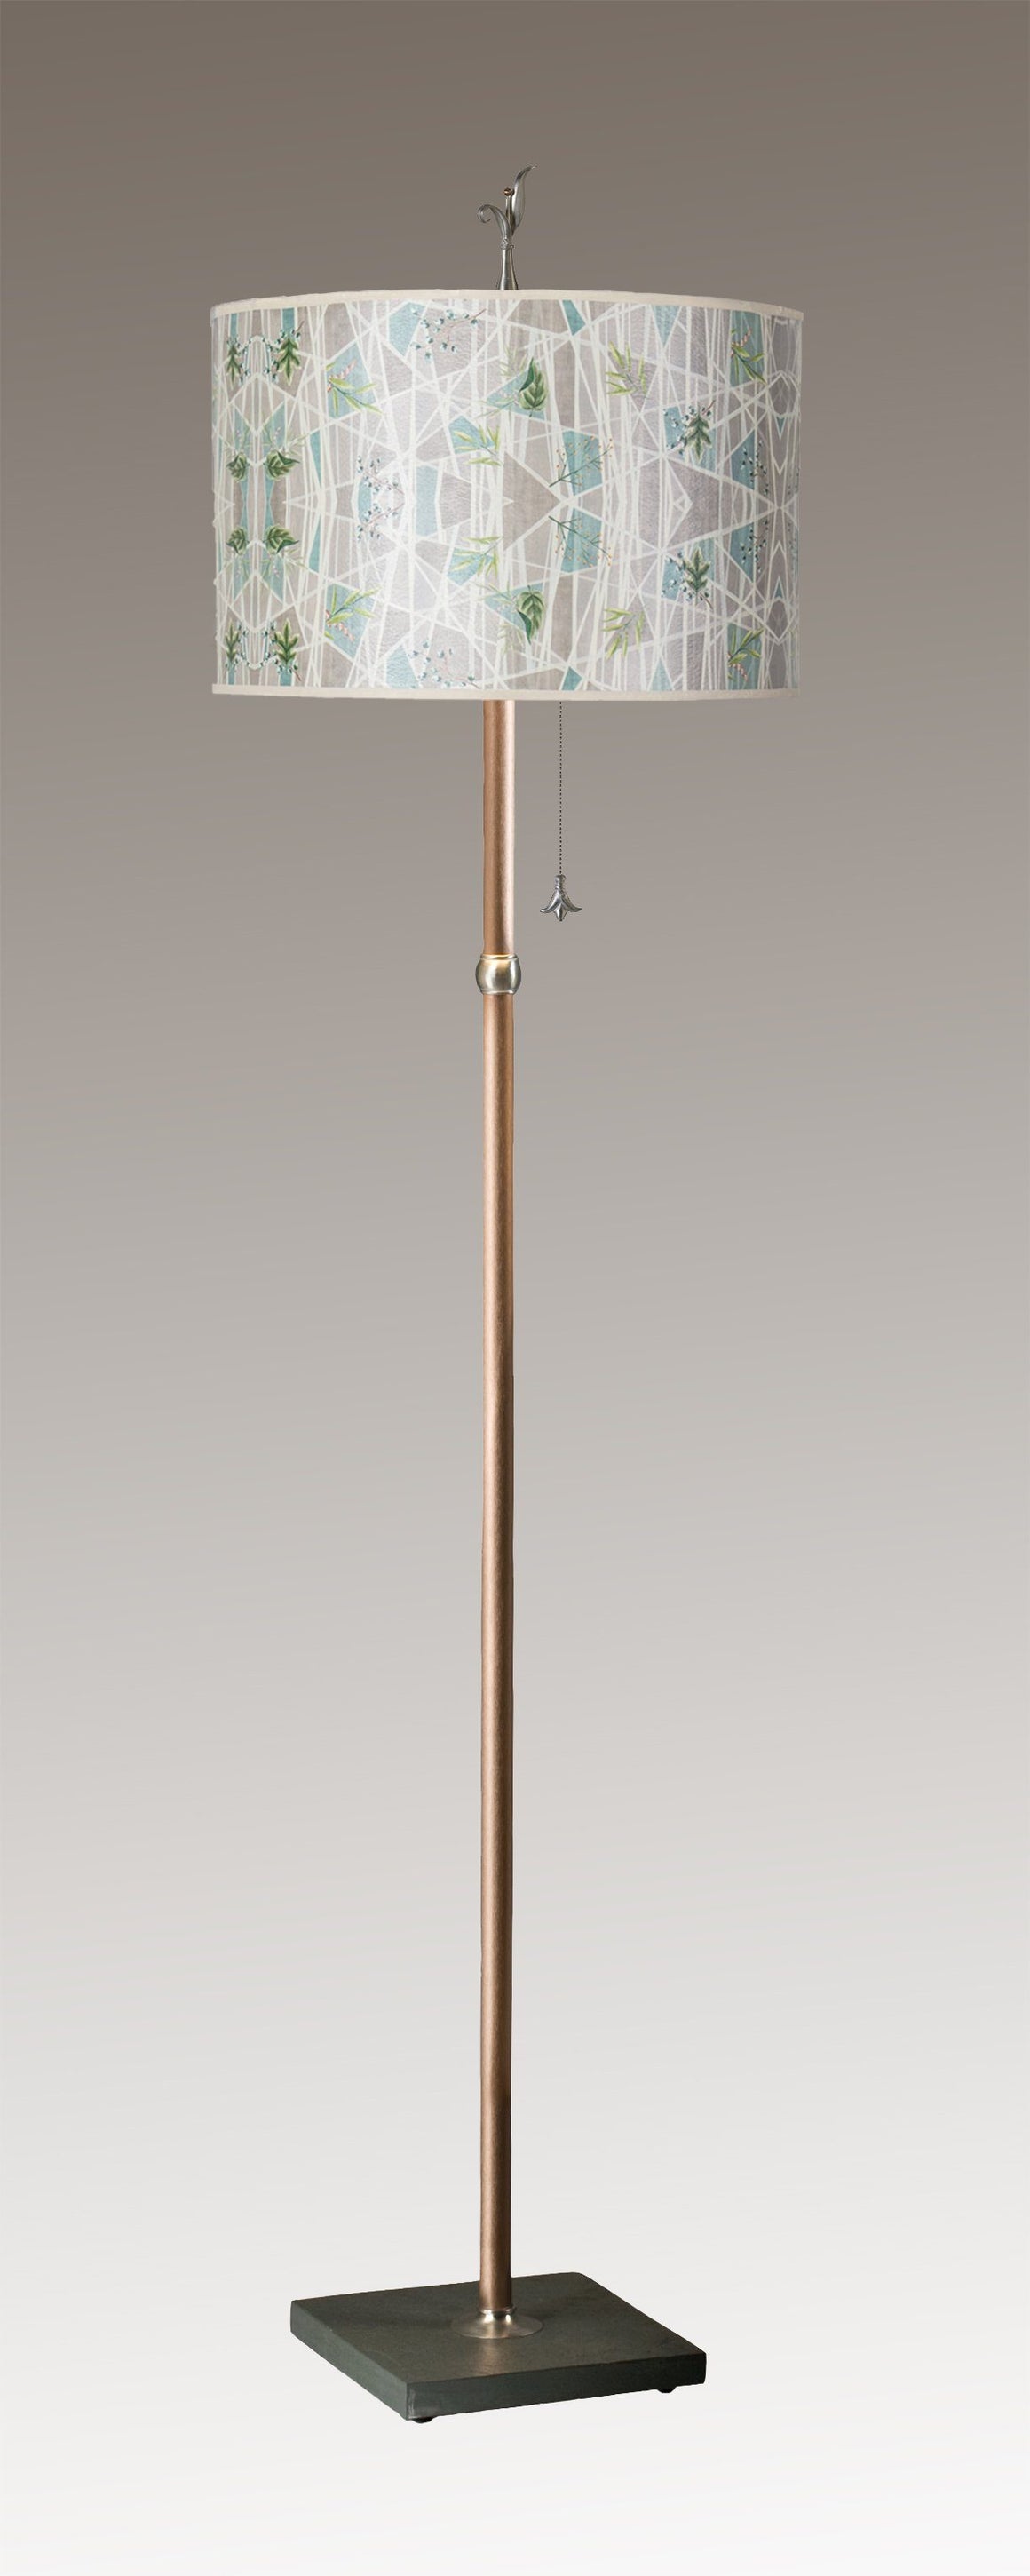 Copper Floor Lamp with Large Drum Shade in Prism